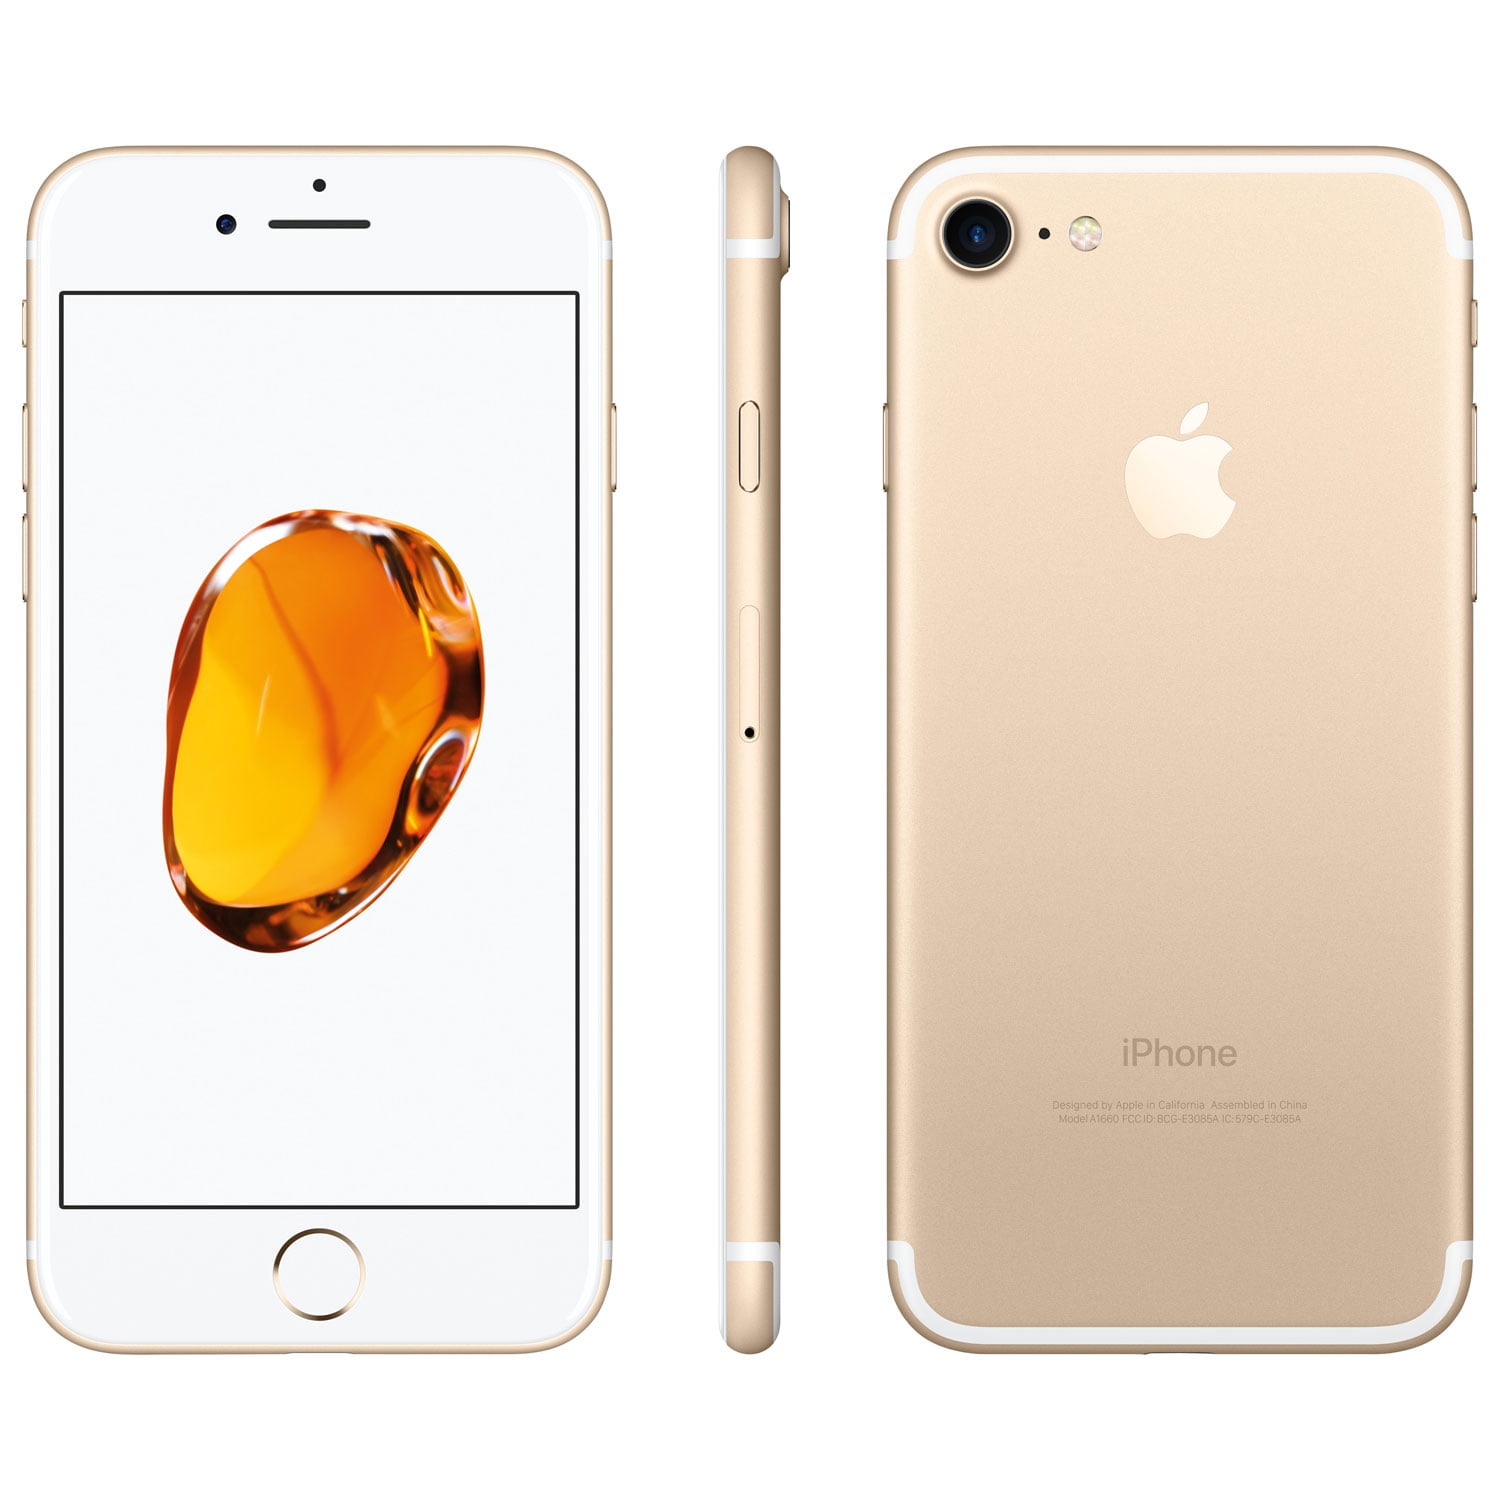 Pre-Owned Apple iPhone 7 128GB Gold GSM Unlocked Brand New (Refurbished:  Good)